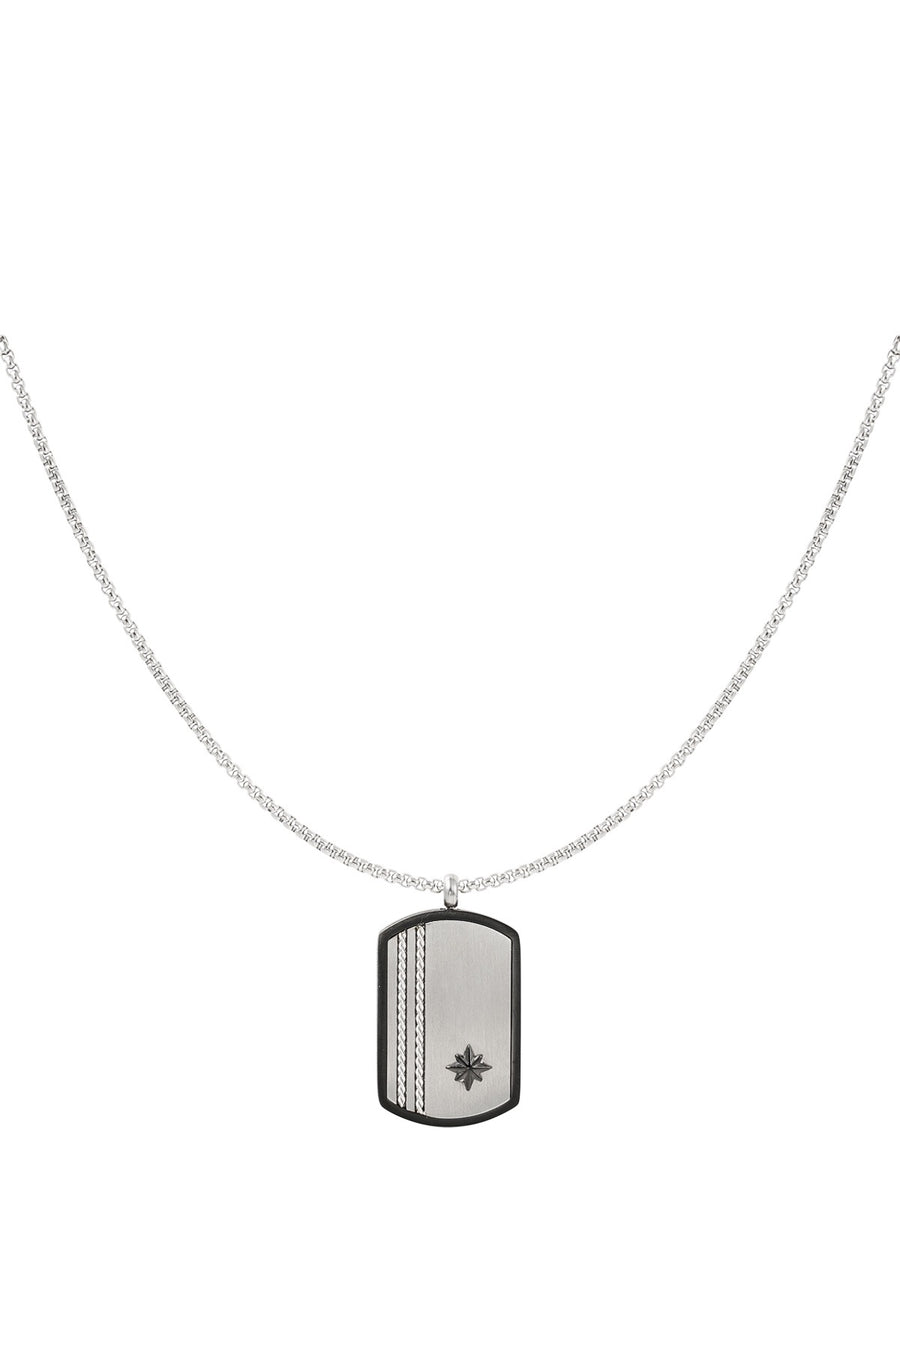 Mens Charm Necklace